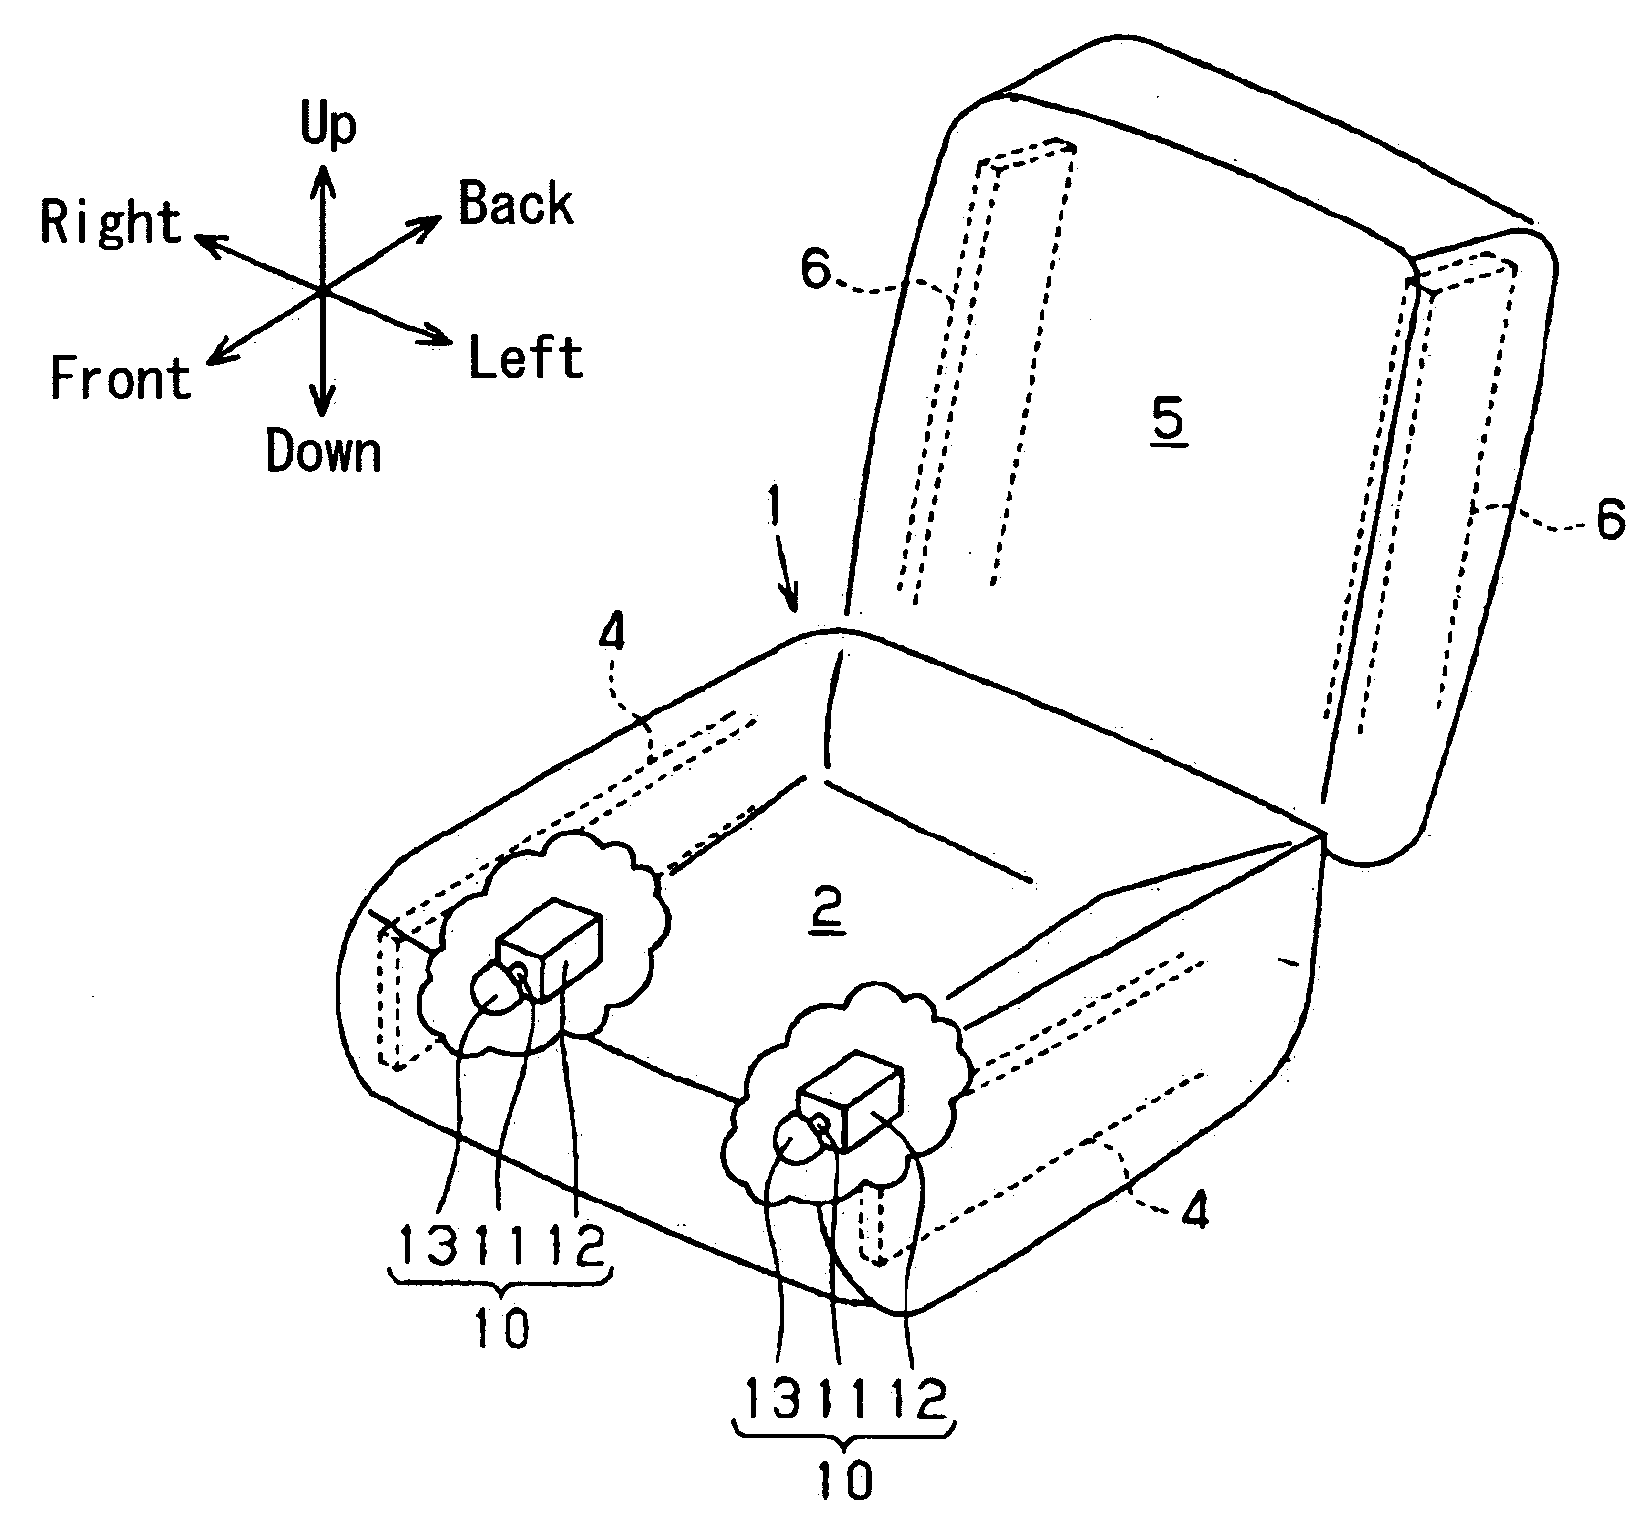 Annunciating device for vehicle